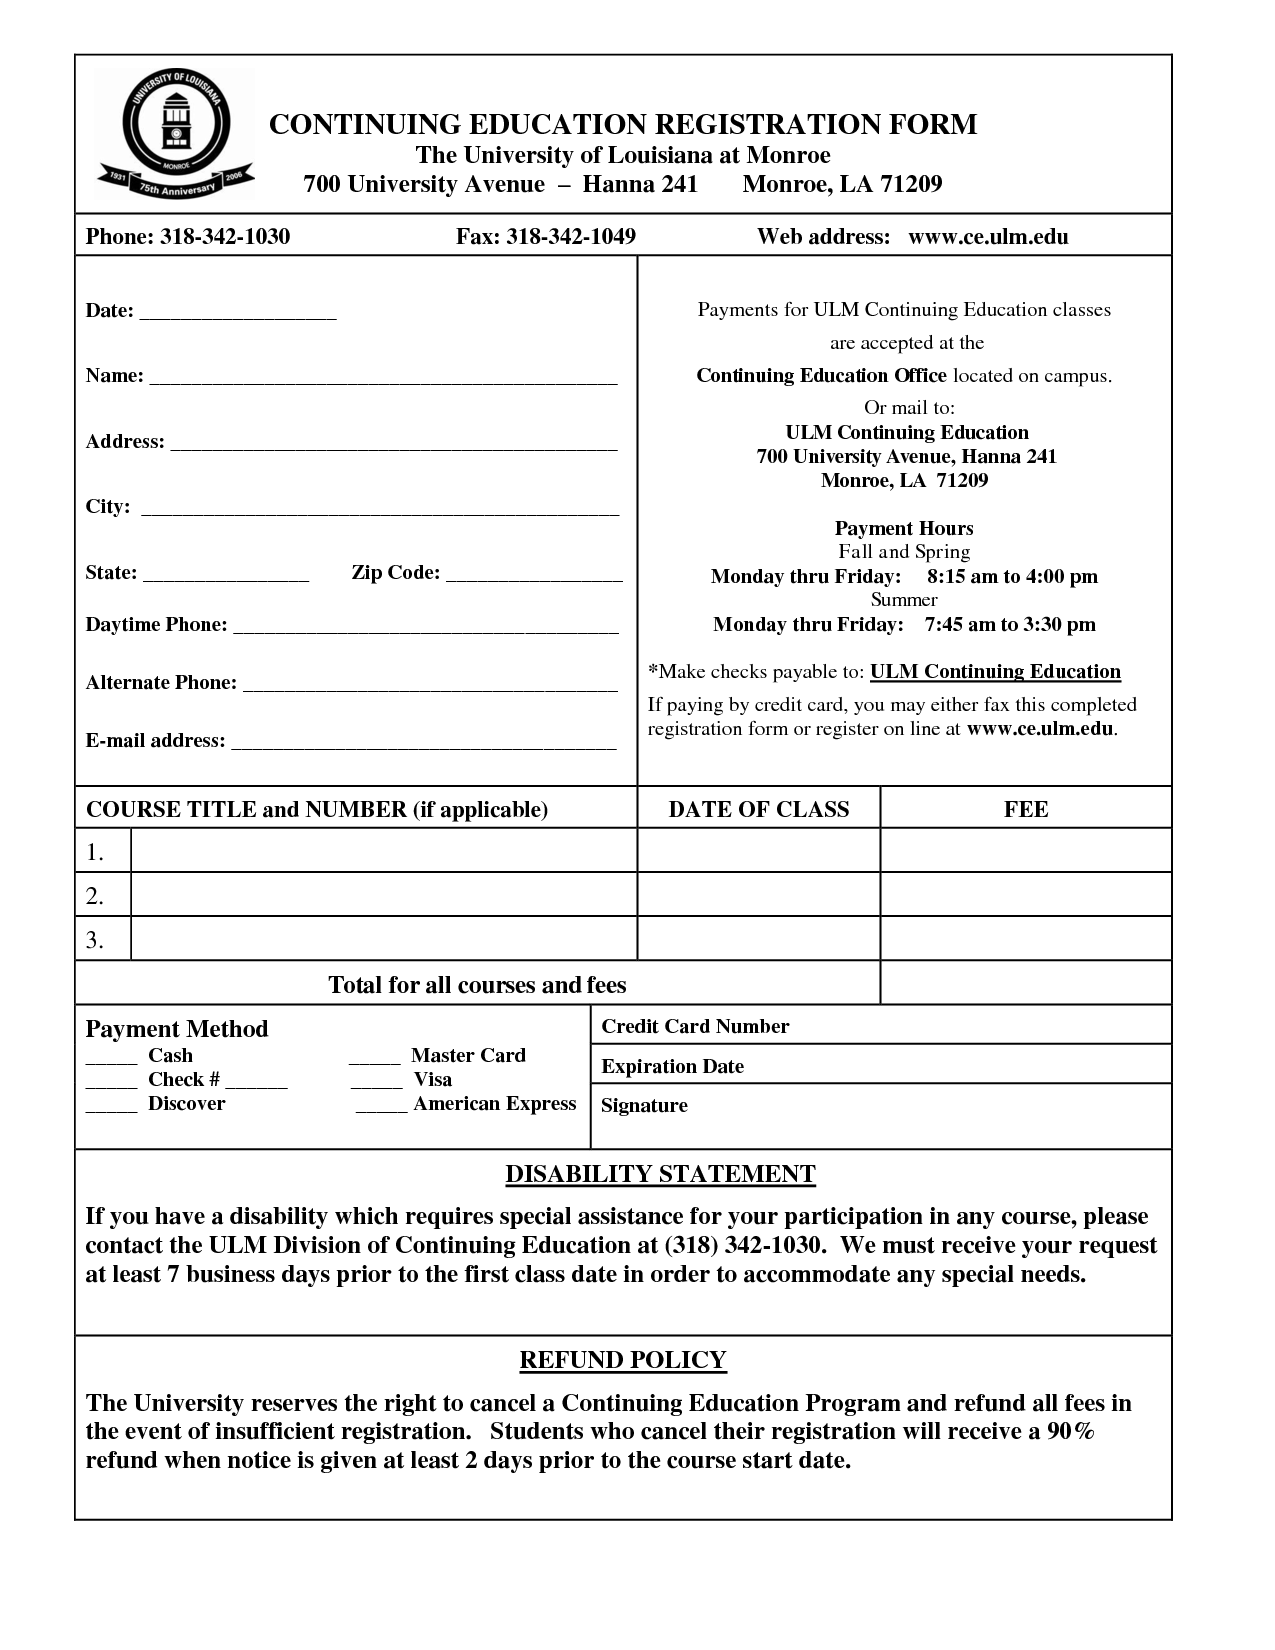 registration forms template free   Boat.jeremyeaton.co